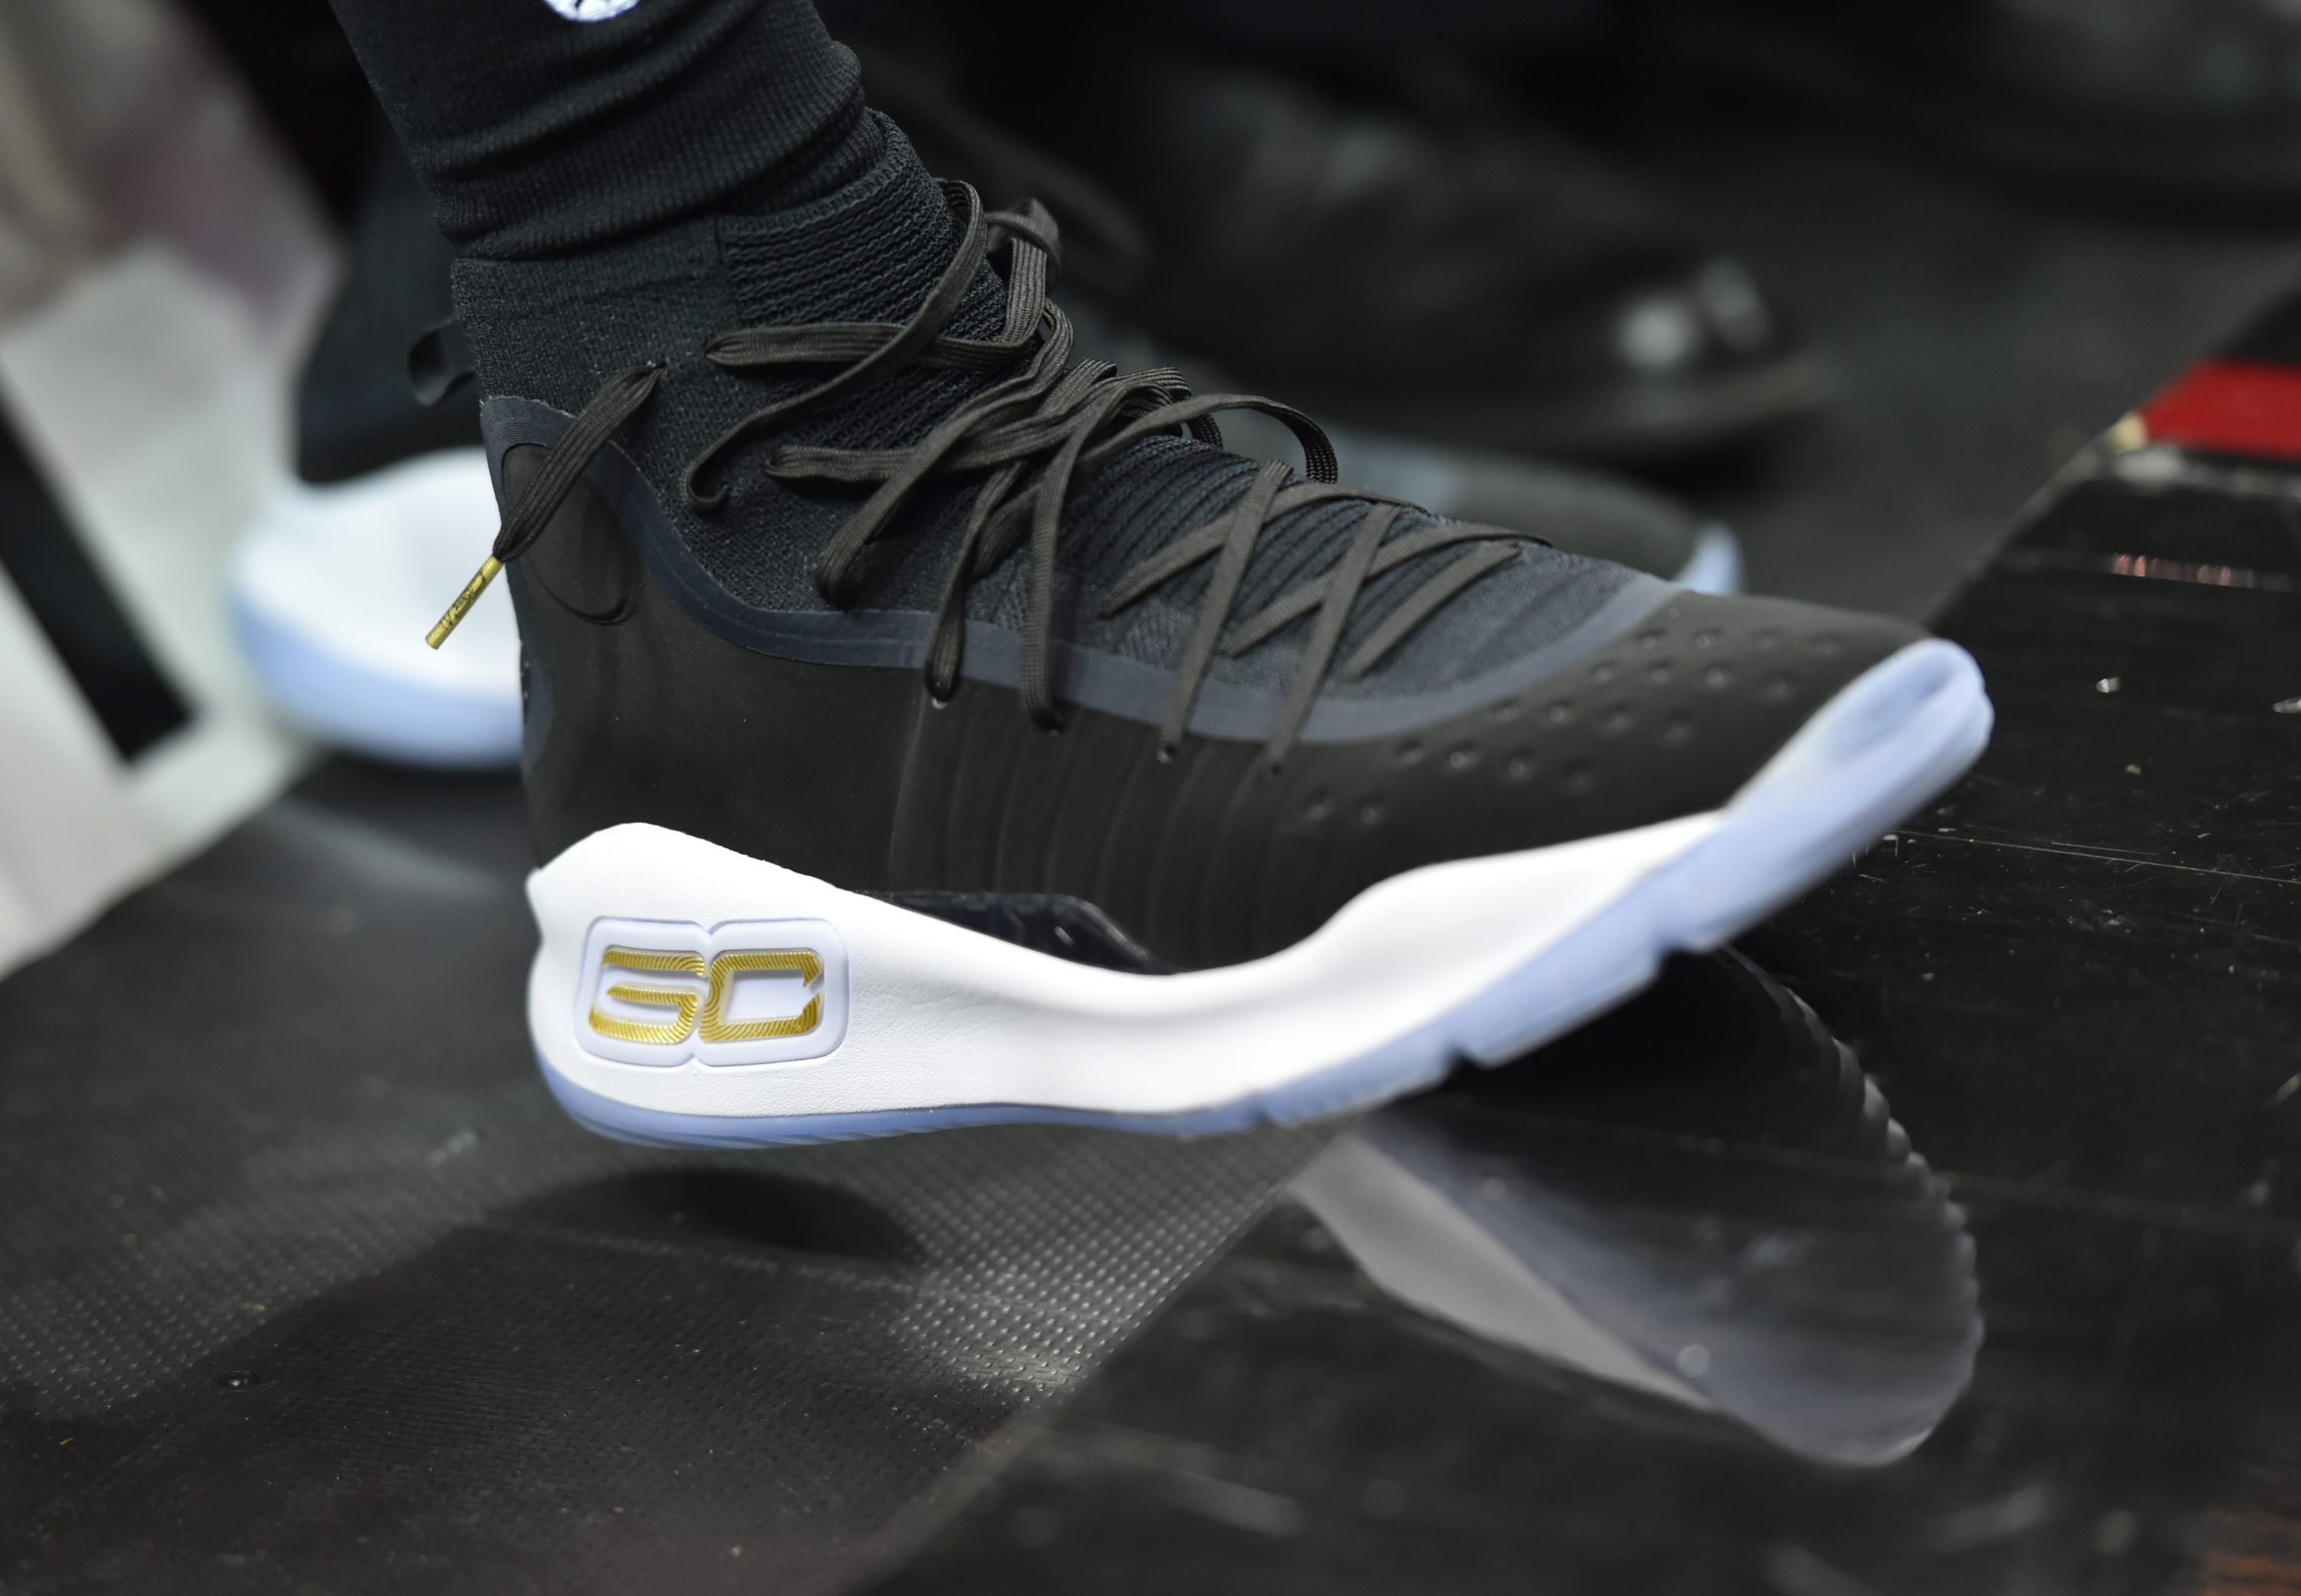 Steph Curry Debuts Another Under Armour Curry 4